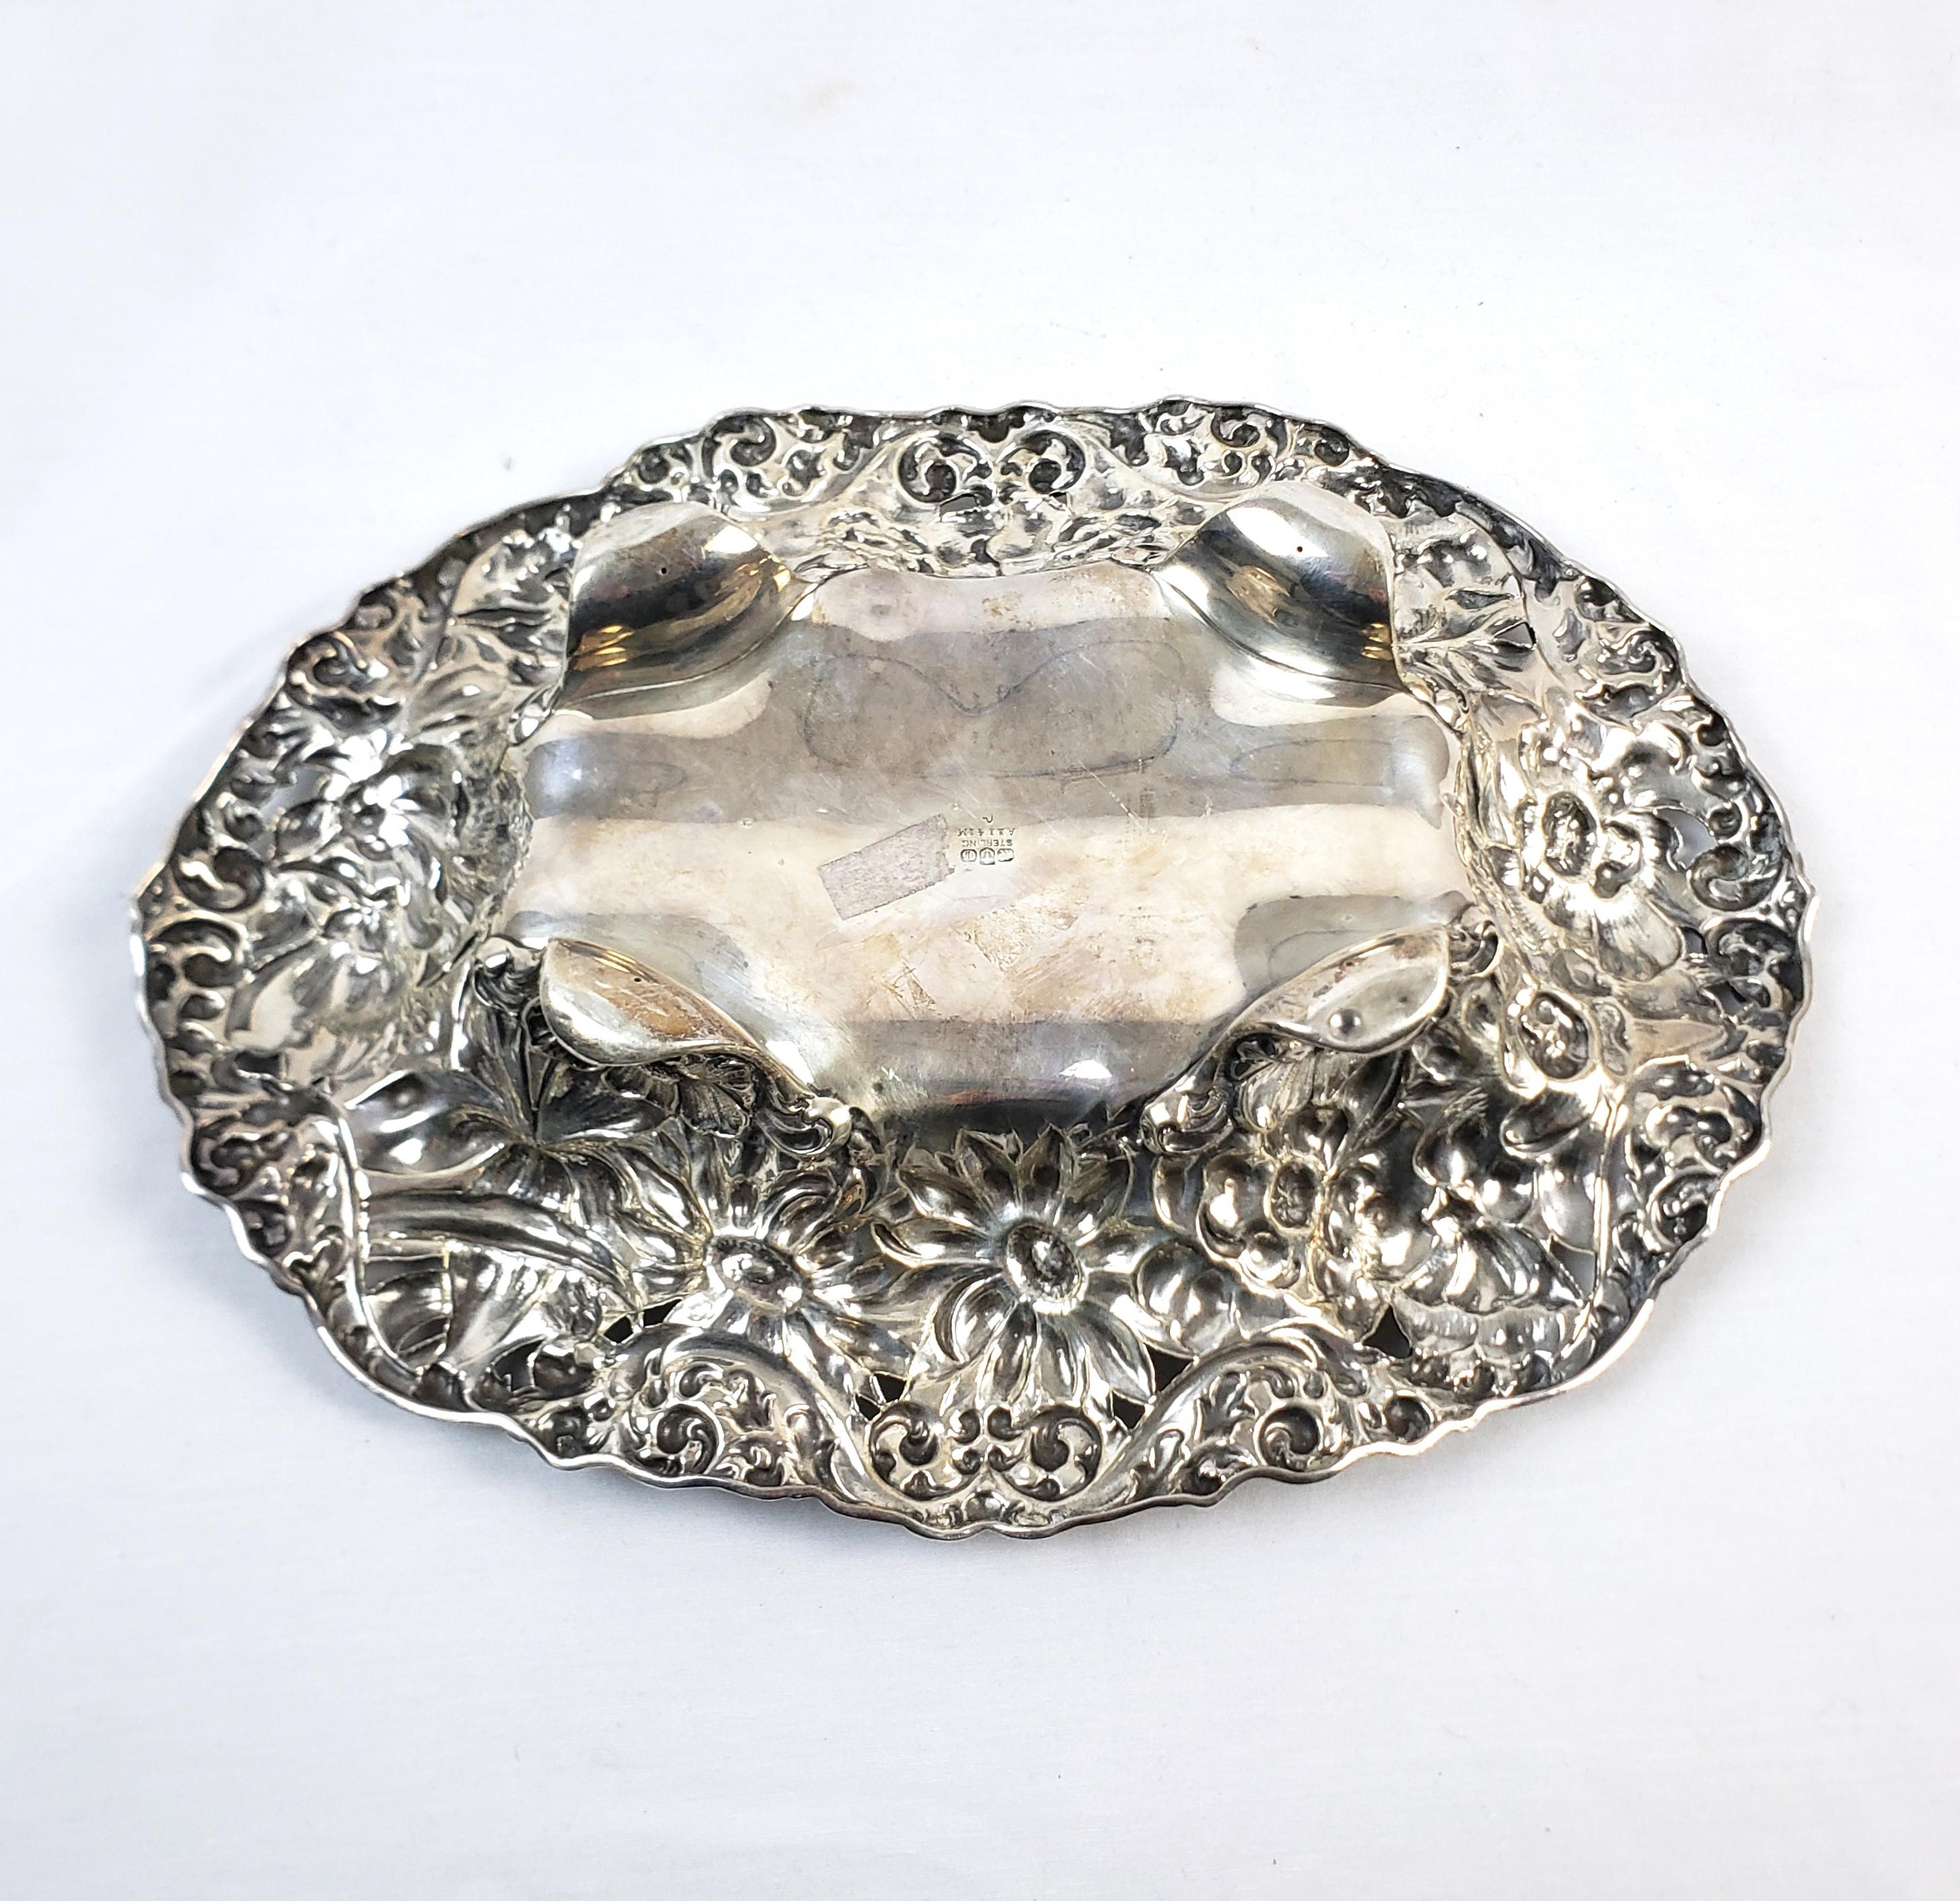 Antique Gorham Sterling Silver Bowl with Ornate Chased Floral Decoration For Sale 5